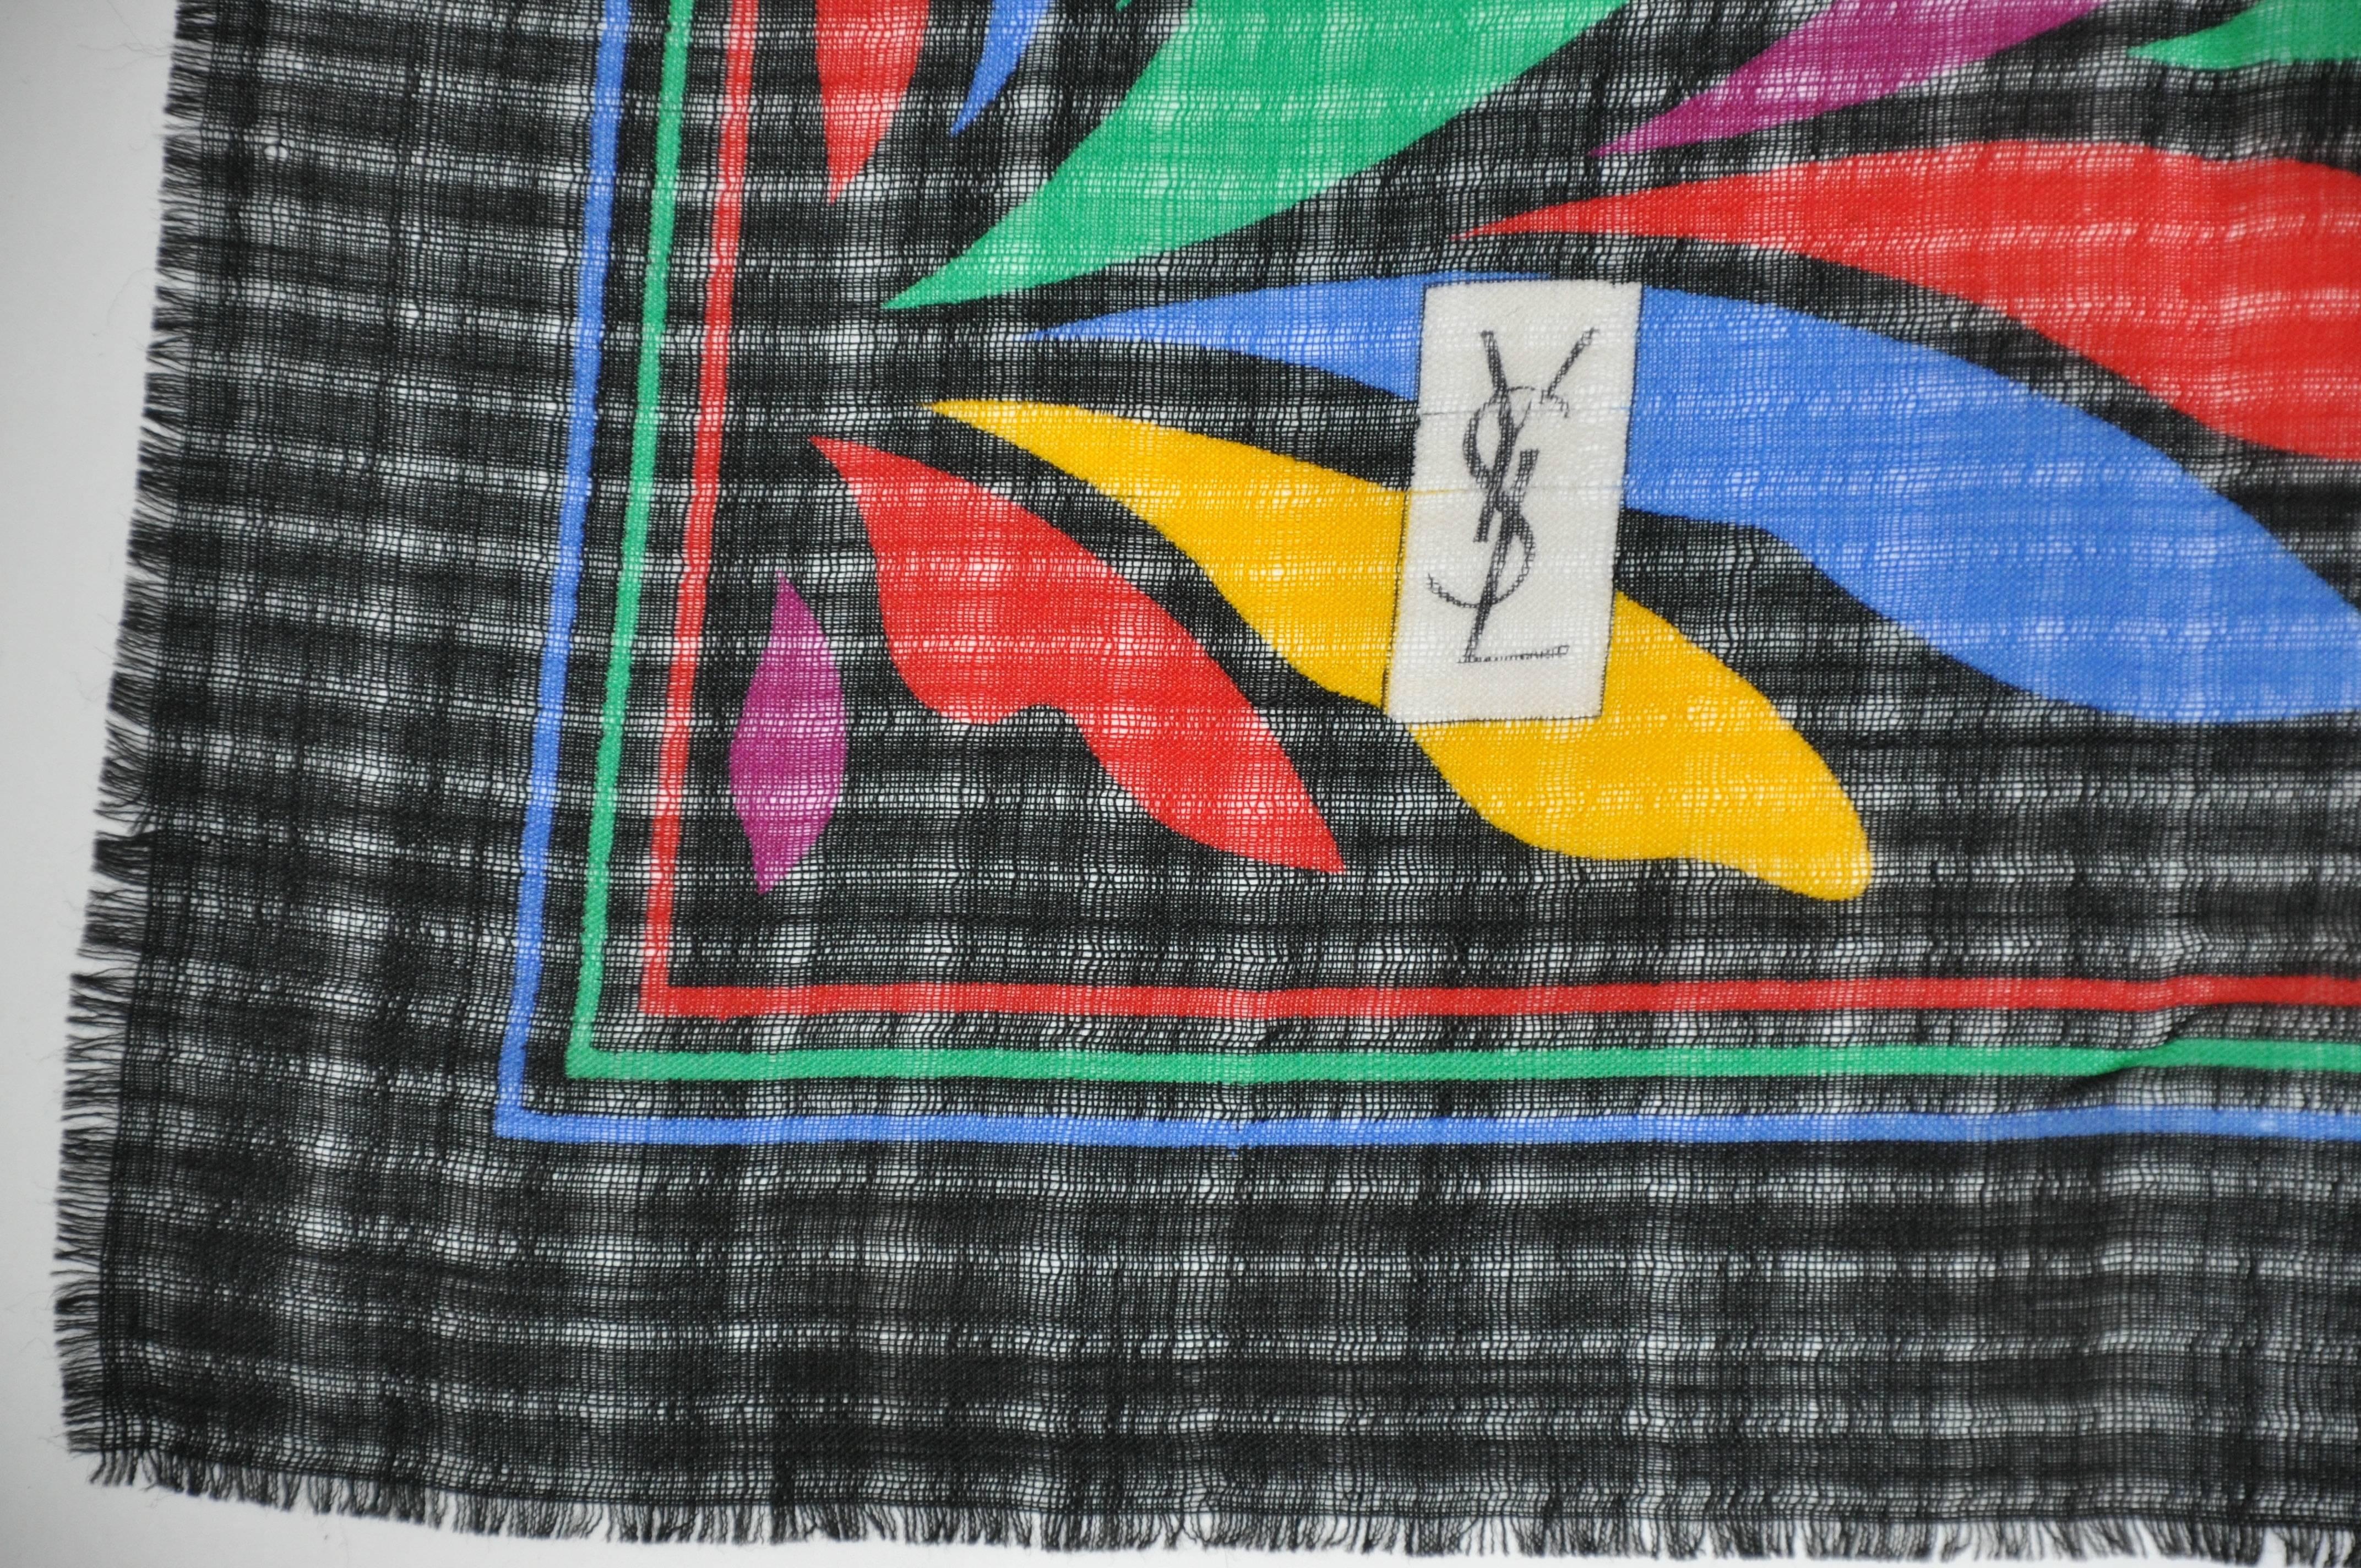        Yves Saint Laurent large Iconic black with multi color block floral wool challis fringed scarf measures 37 1/2 inches by 38 inches. Made in Japan.